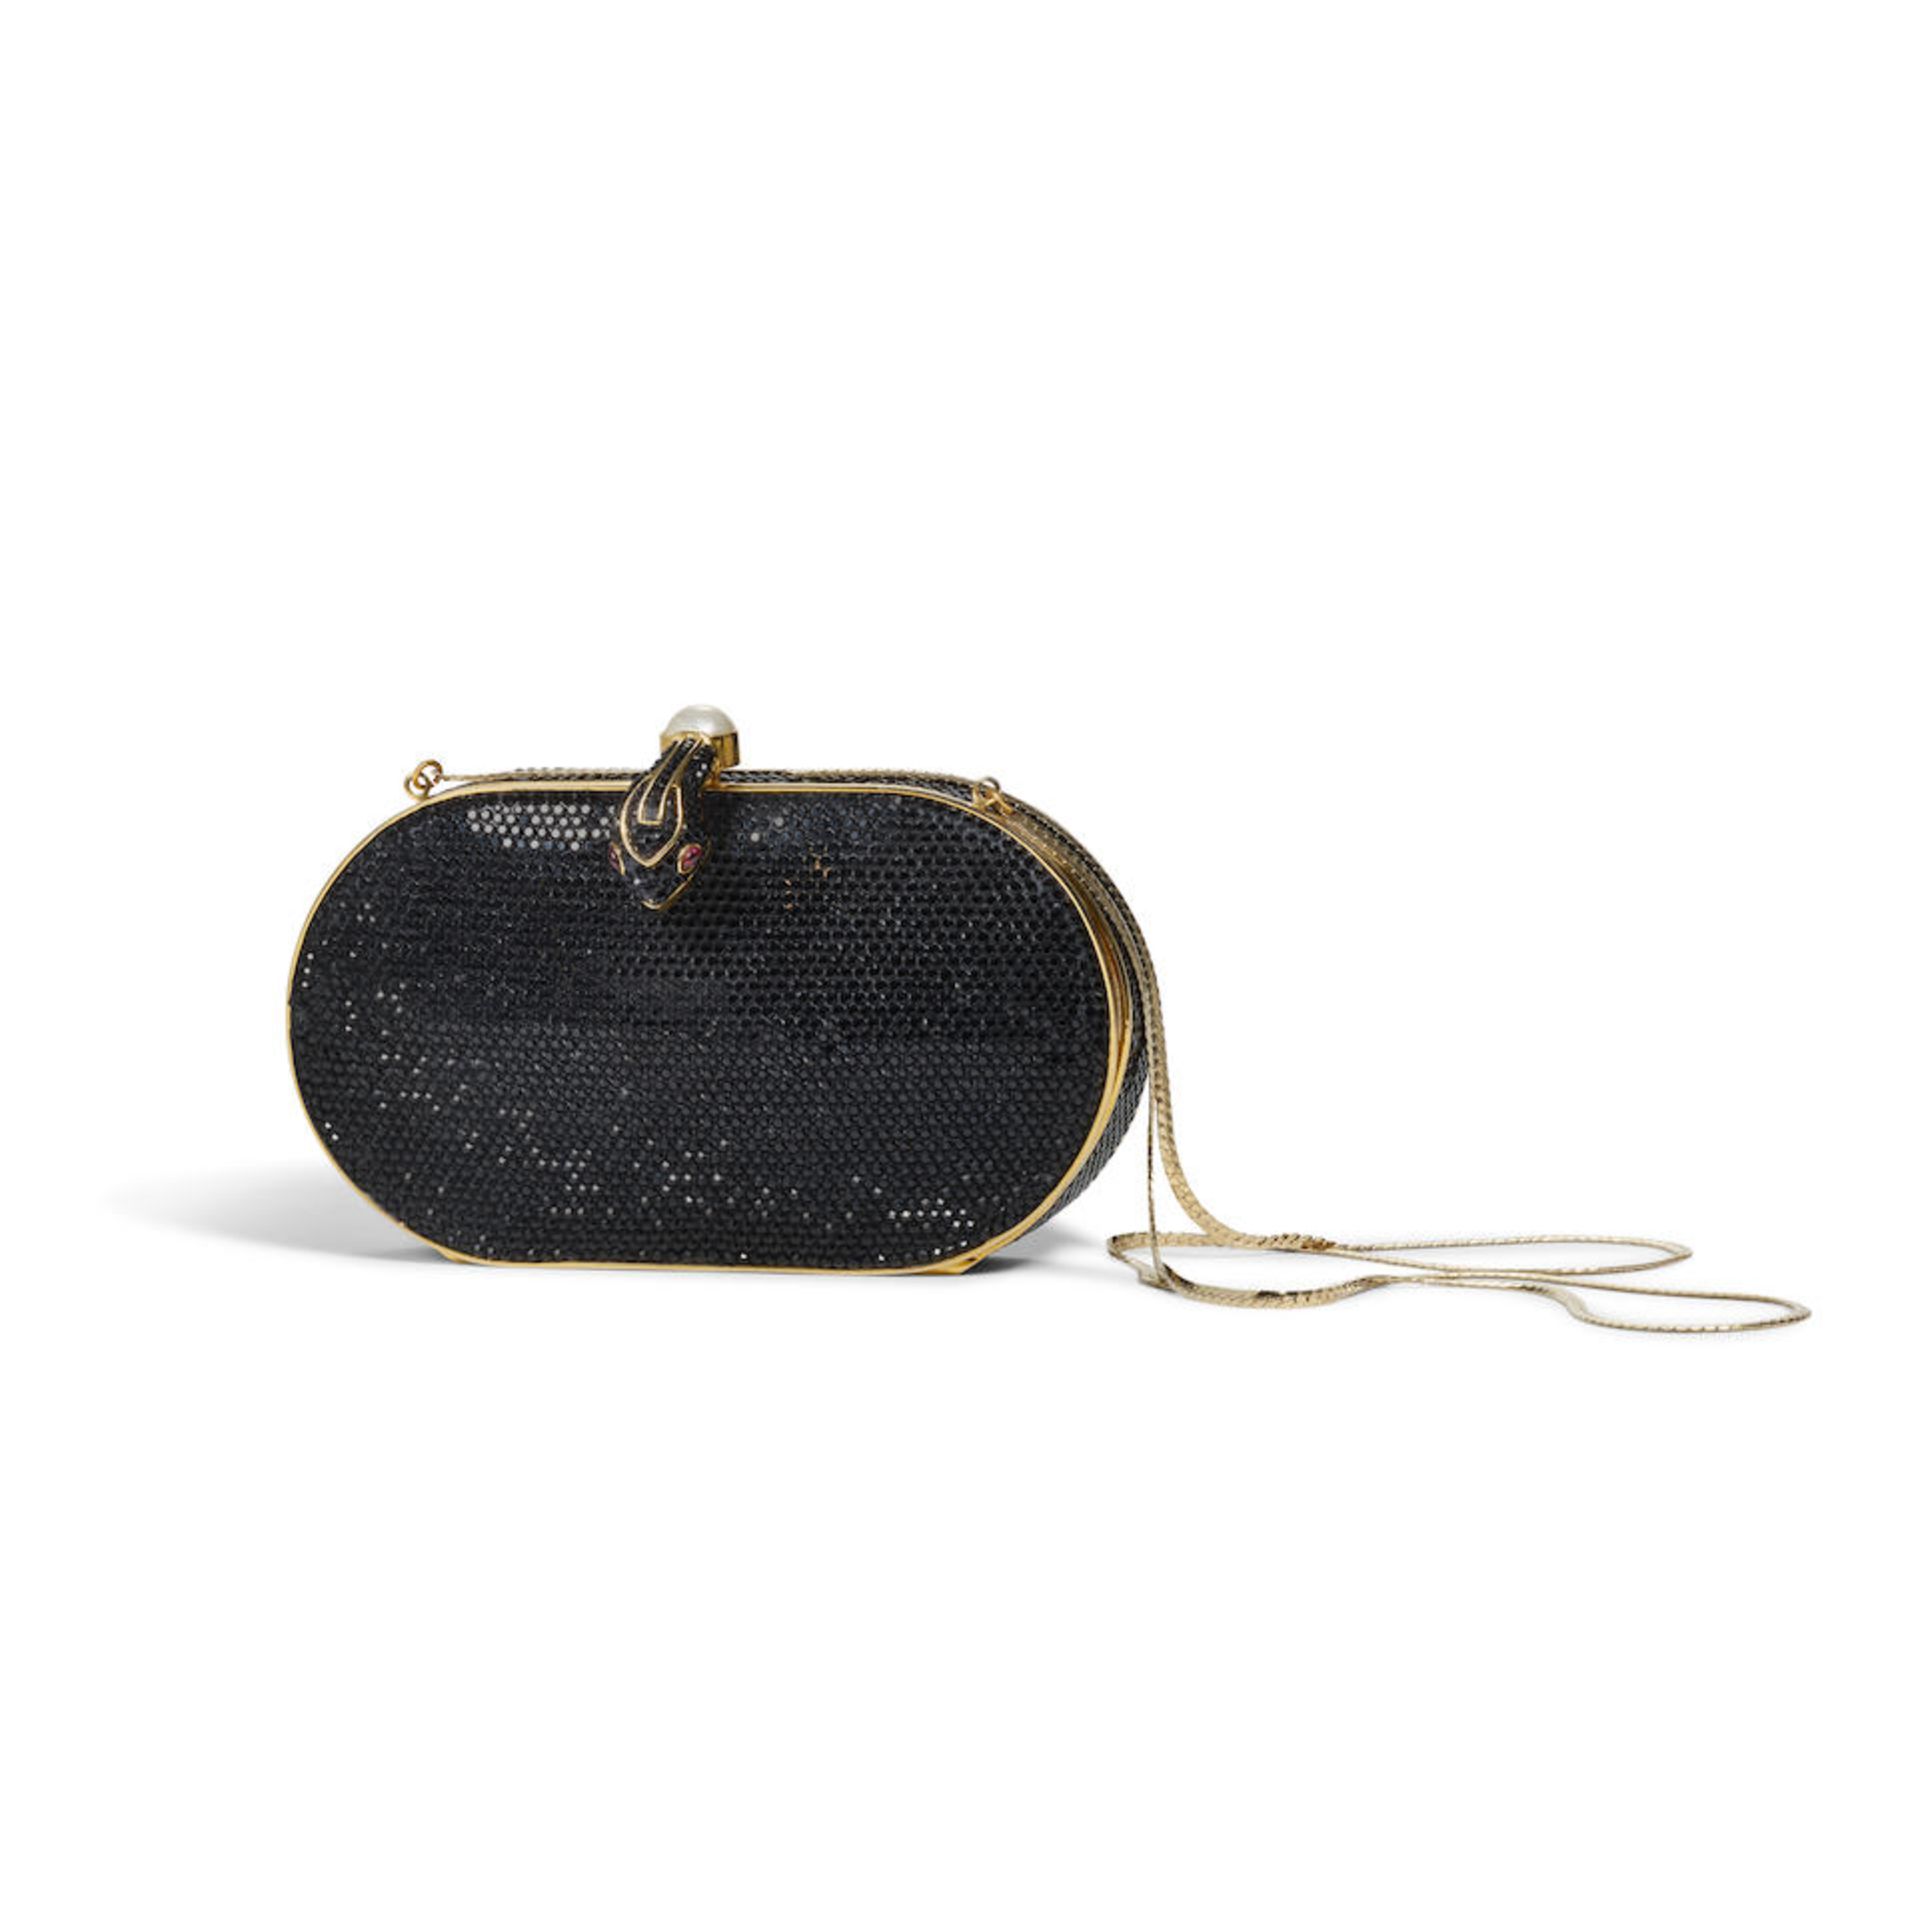 JUDITH LEIBER: EGYPTIAN ARCHIVE SNAKE CHARMER MINAUDIERE 20th Century - Image 2 of 2